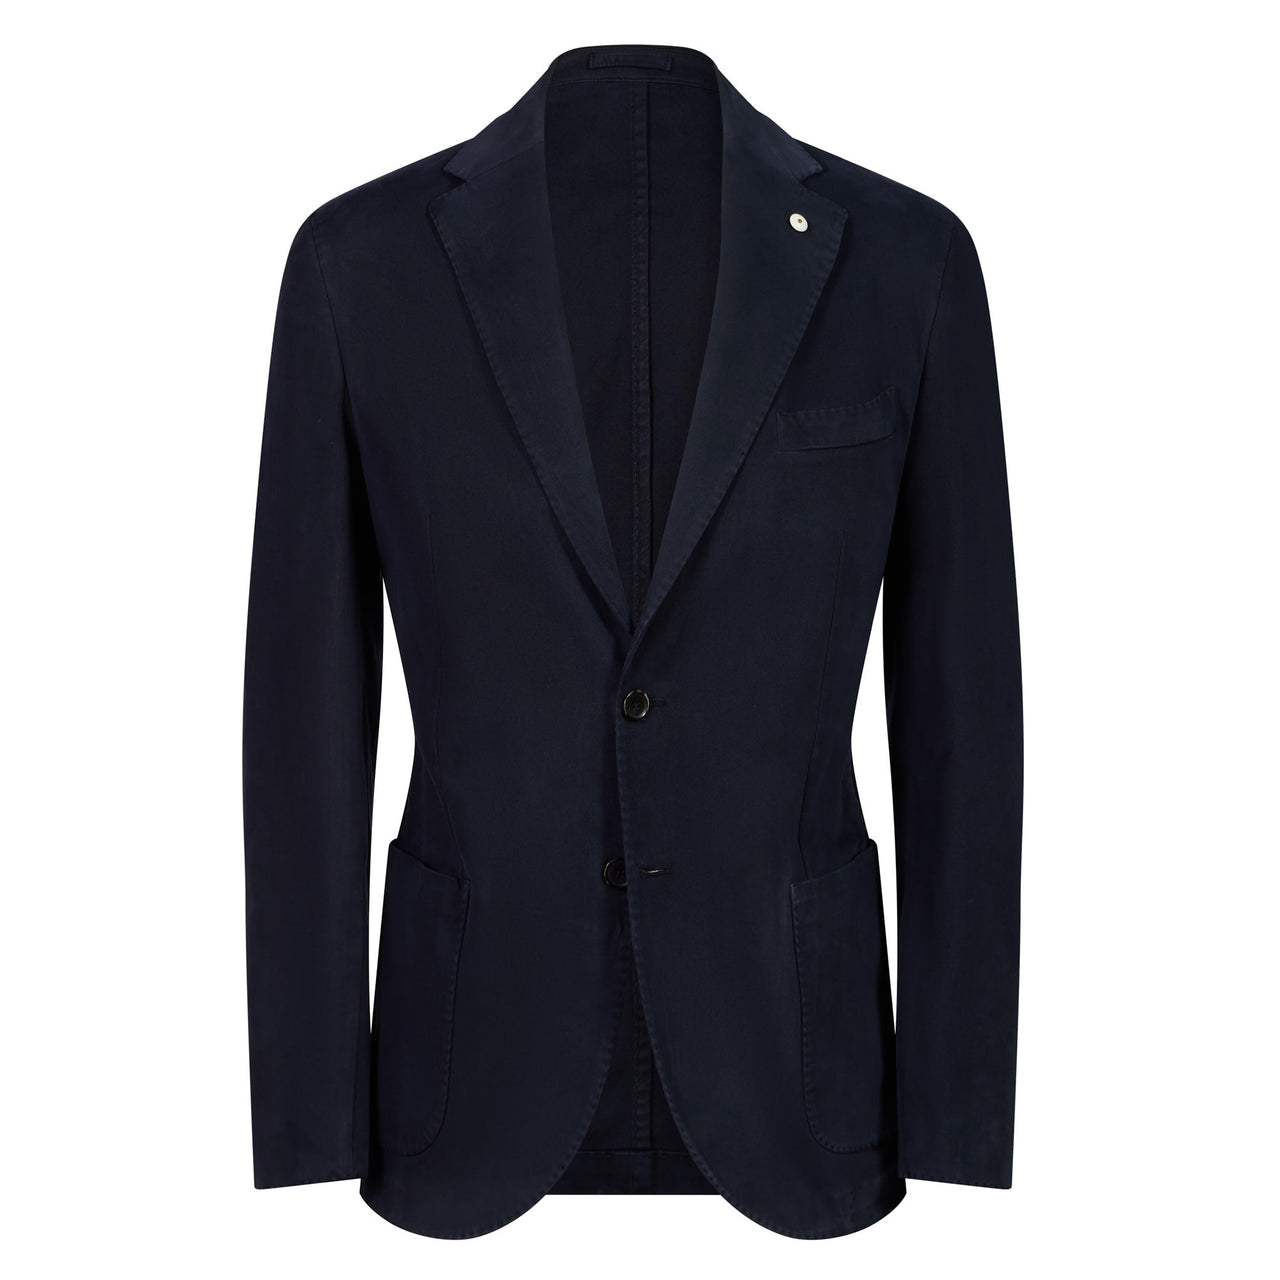 L.B.M. 1911 Unstructured Two-Button Jacket NAVY REG